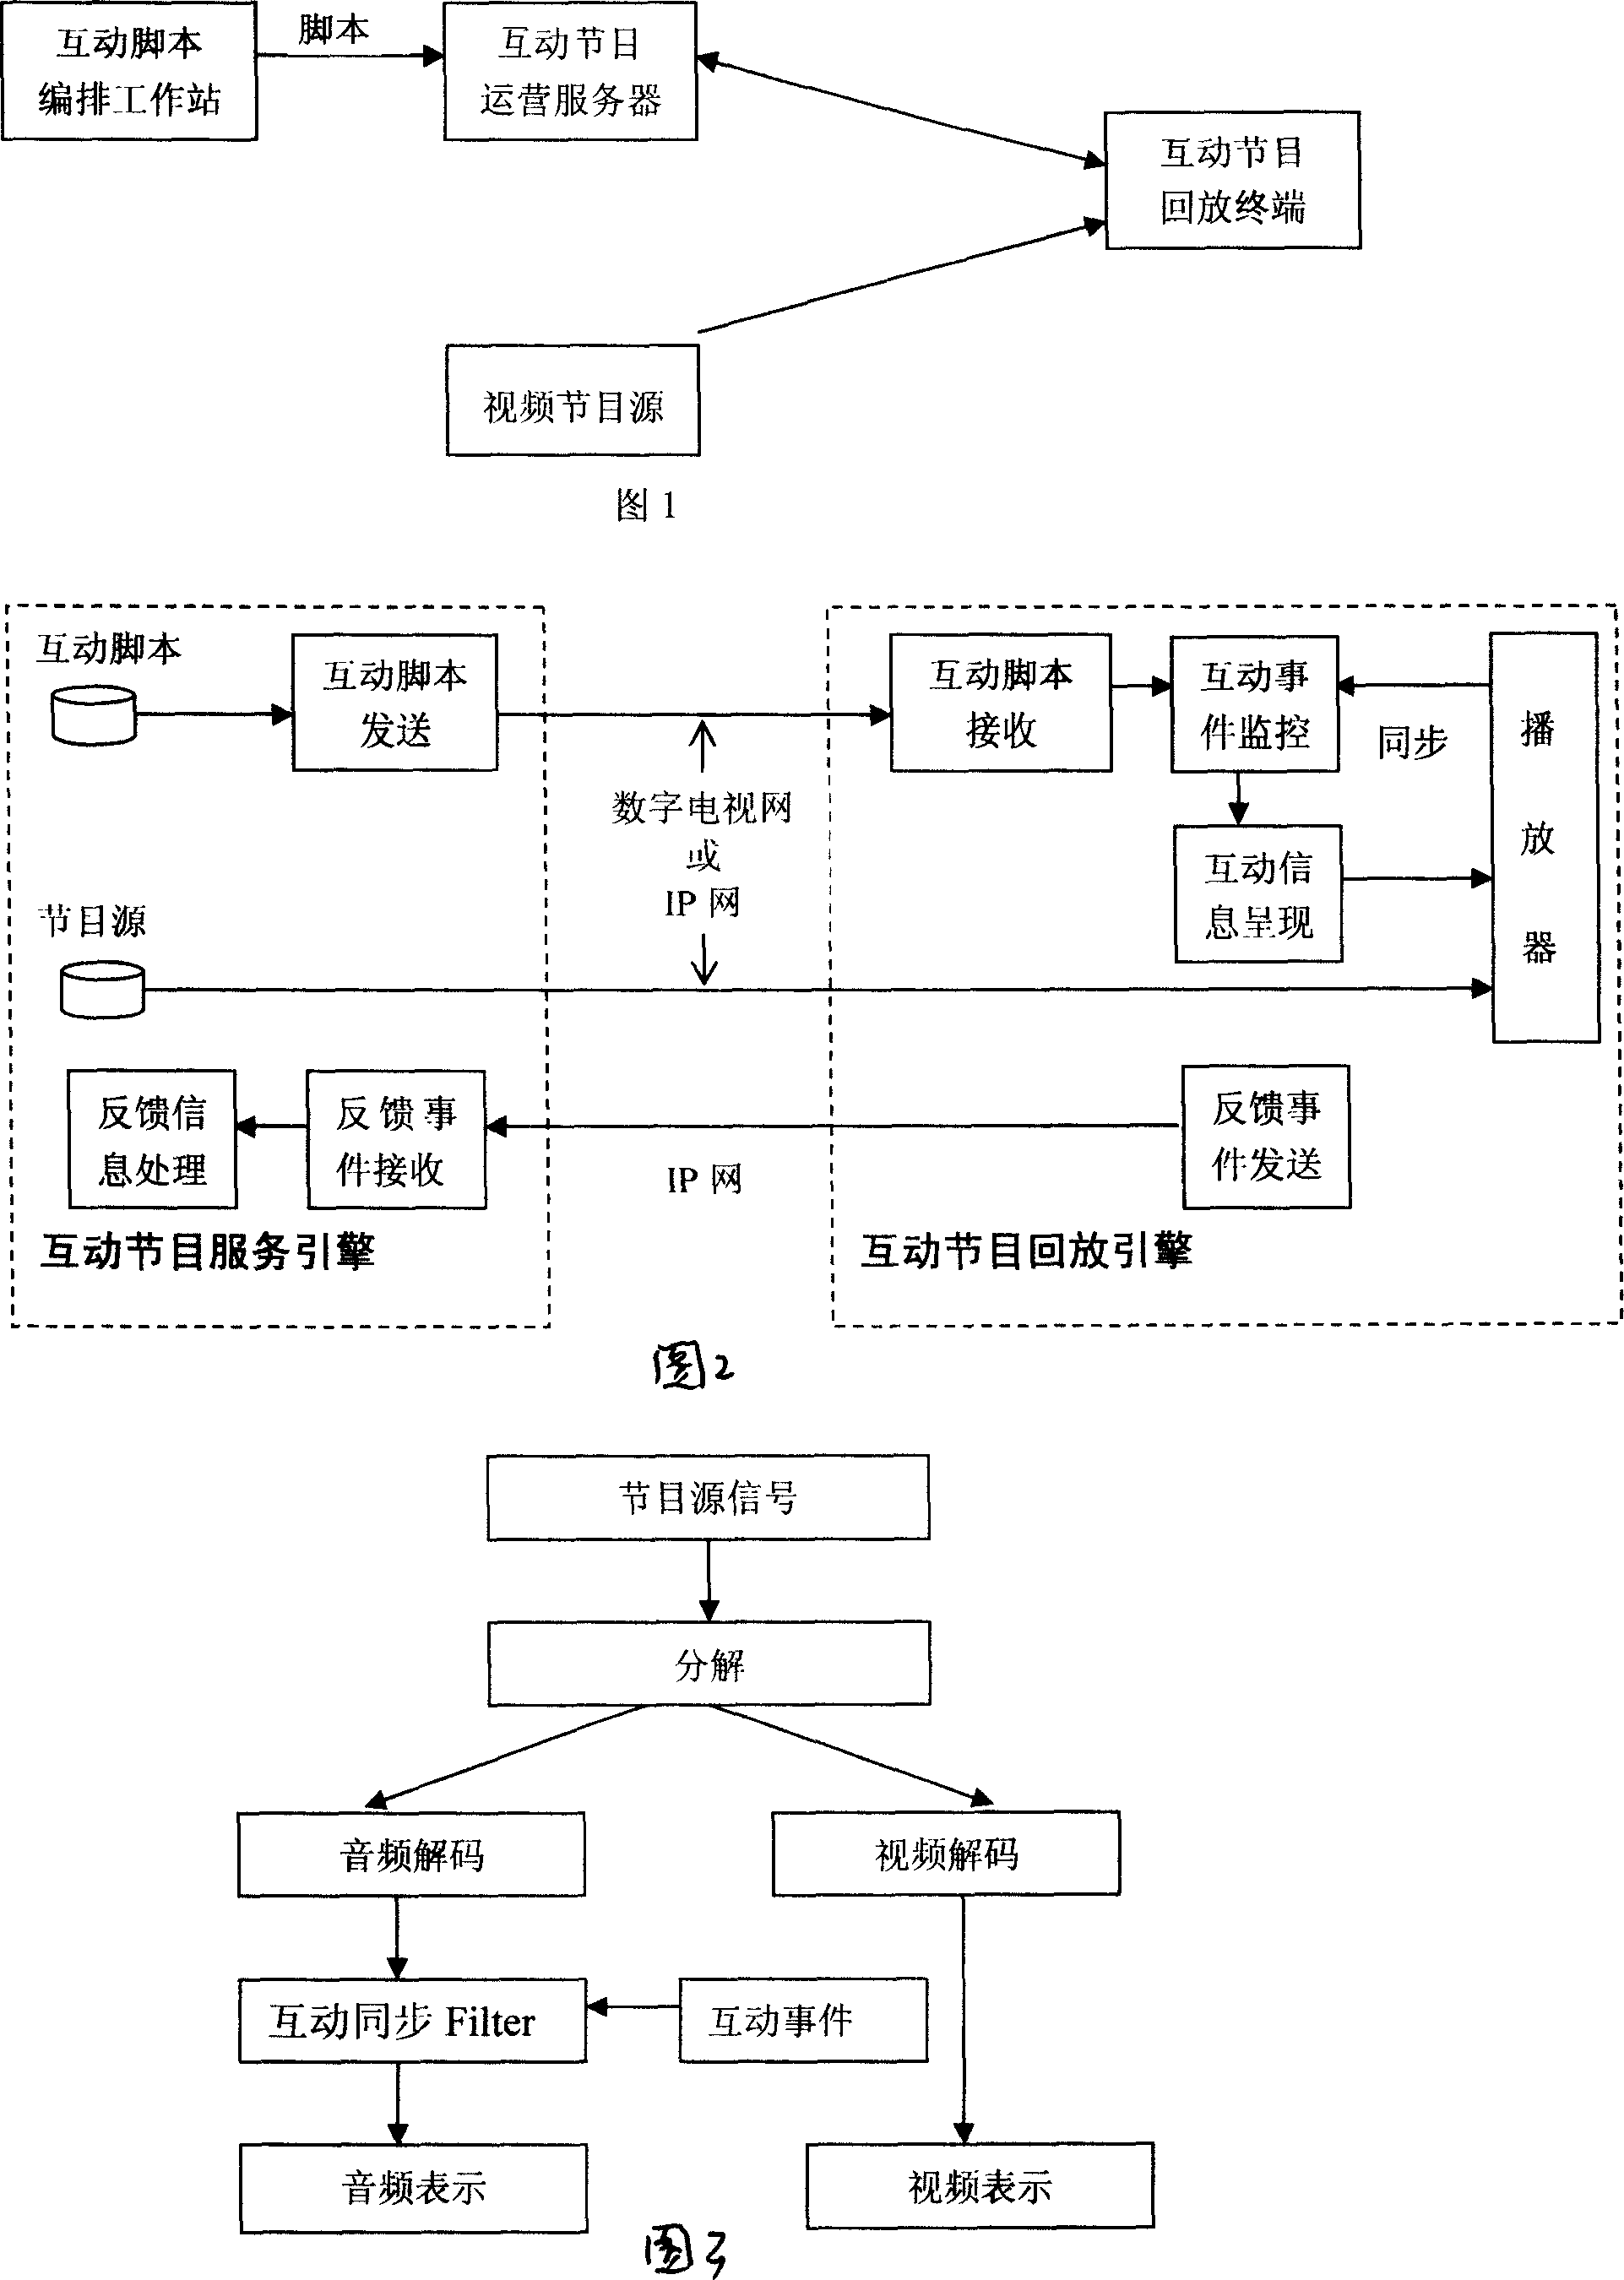 Composition type interacting video-performance system